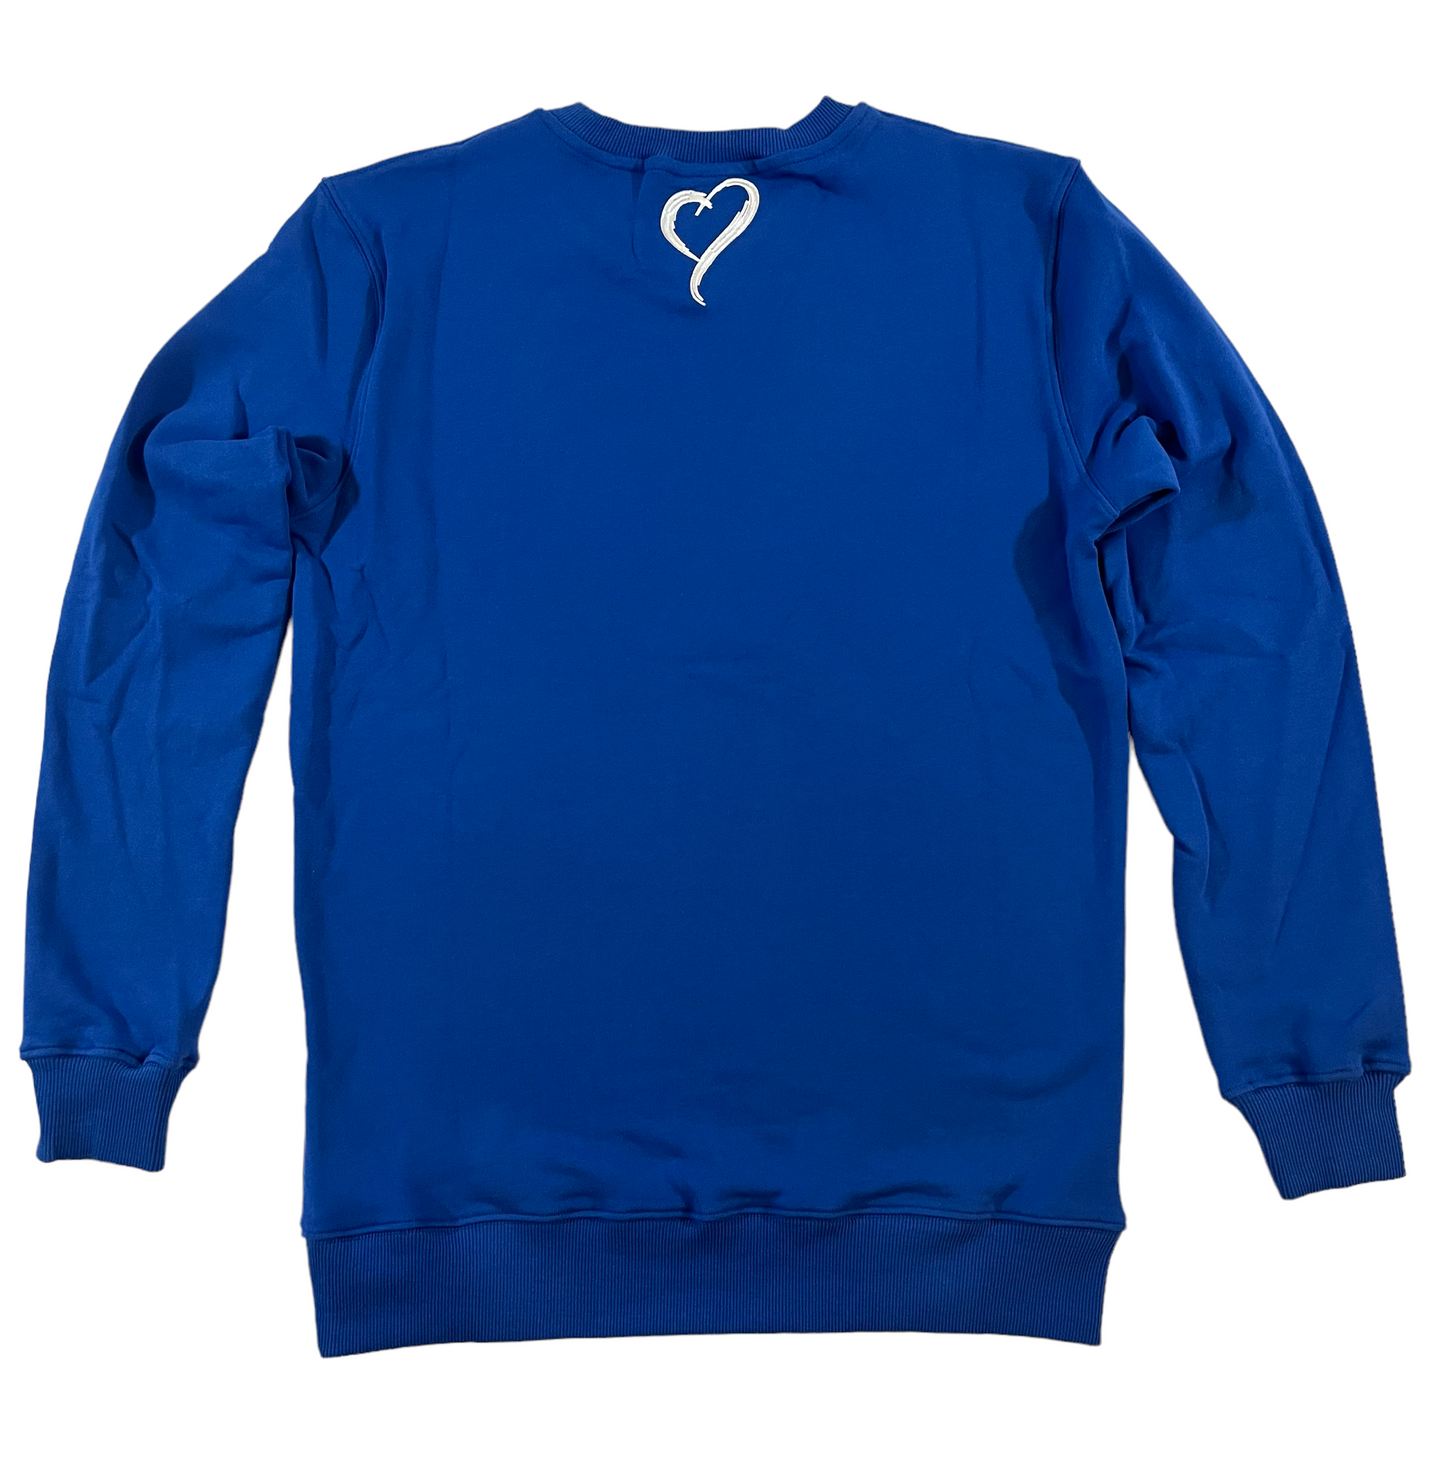 Crew Neck - Royal Blue with White Embroidery